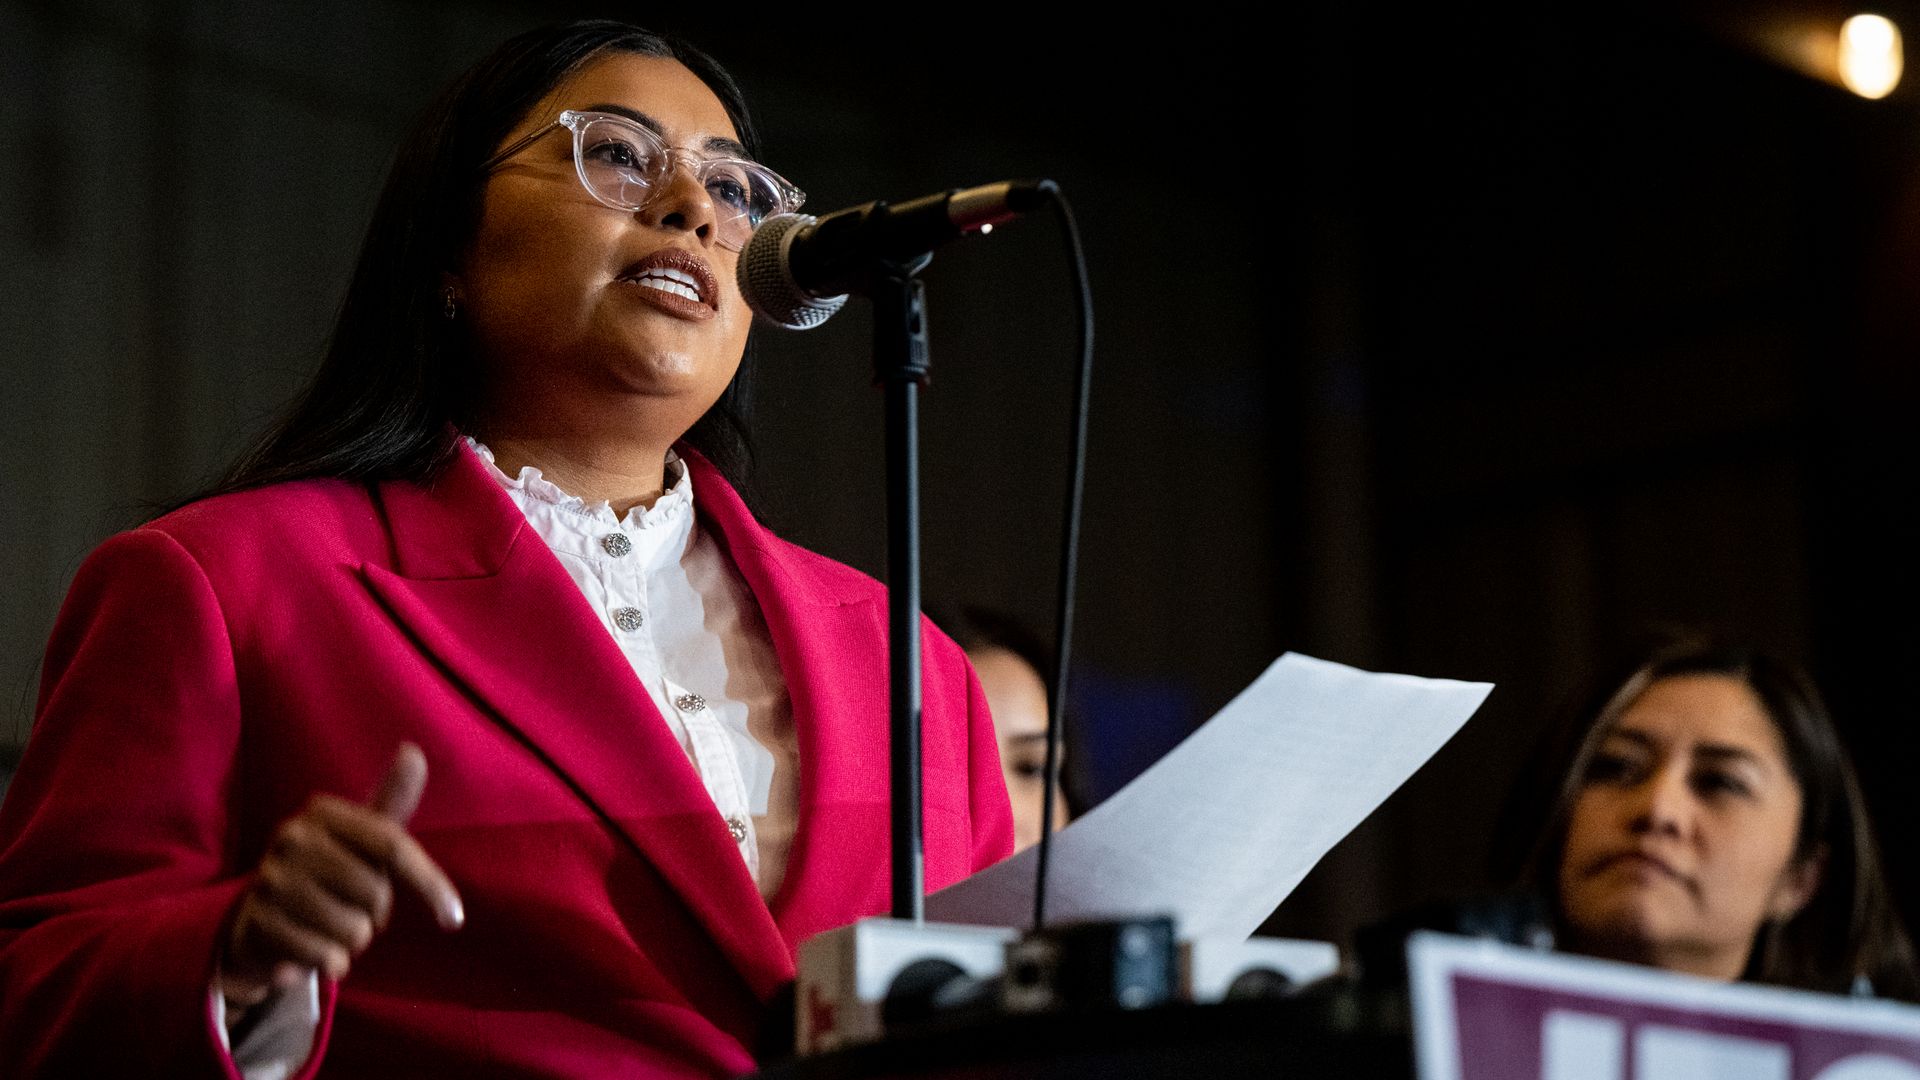 Democratic candidate for the U.S. House, Jessica Cisneros, speaks in front of a microphone in Laredo, Texas